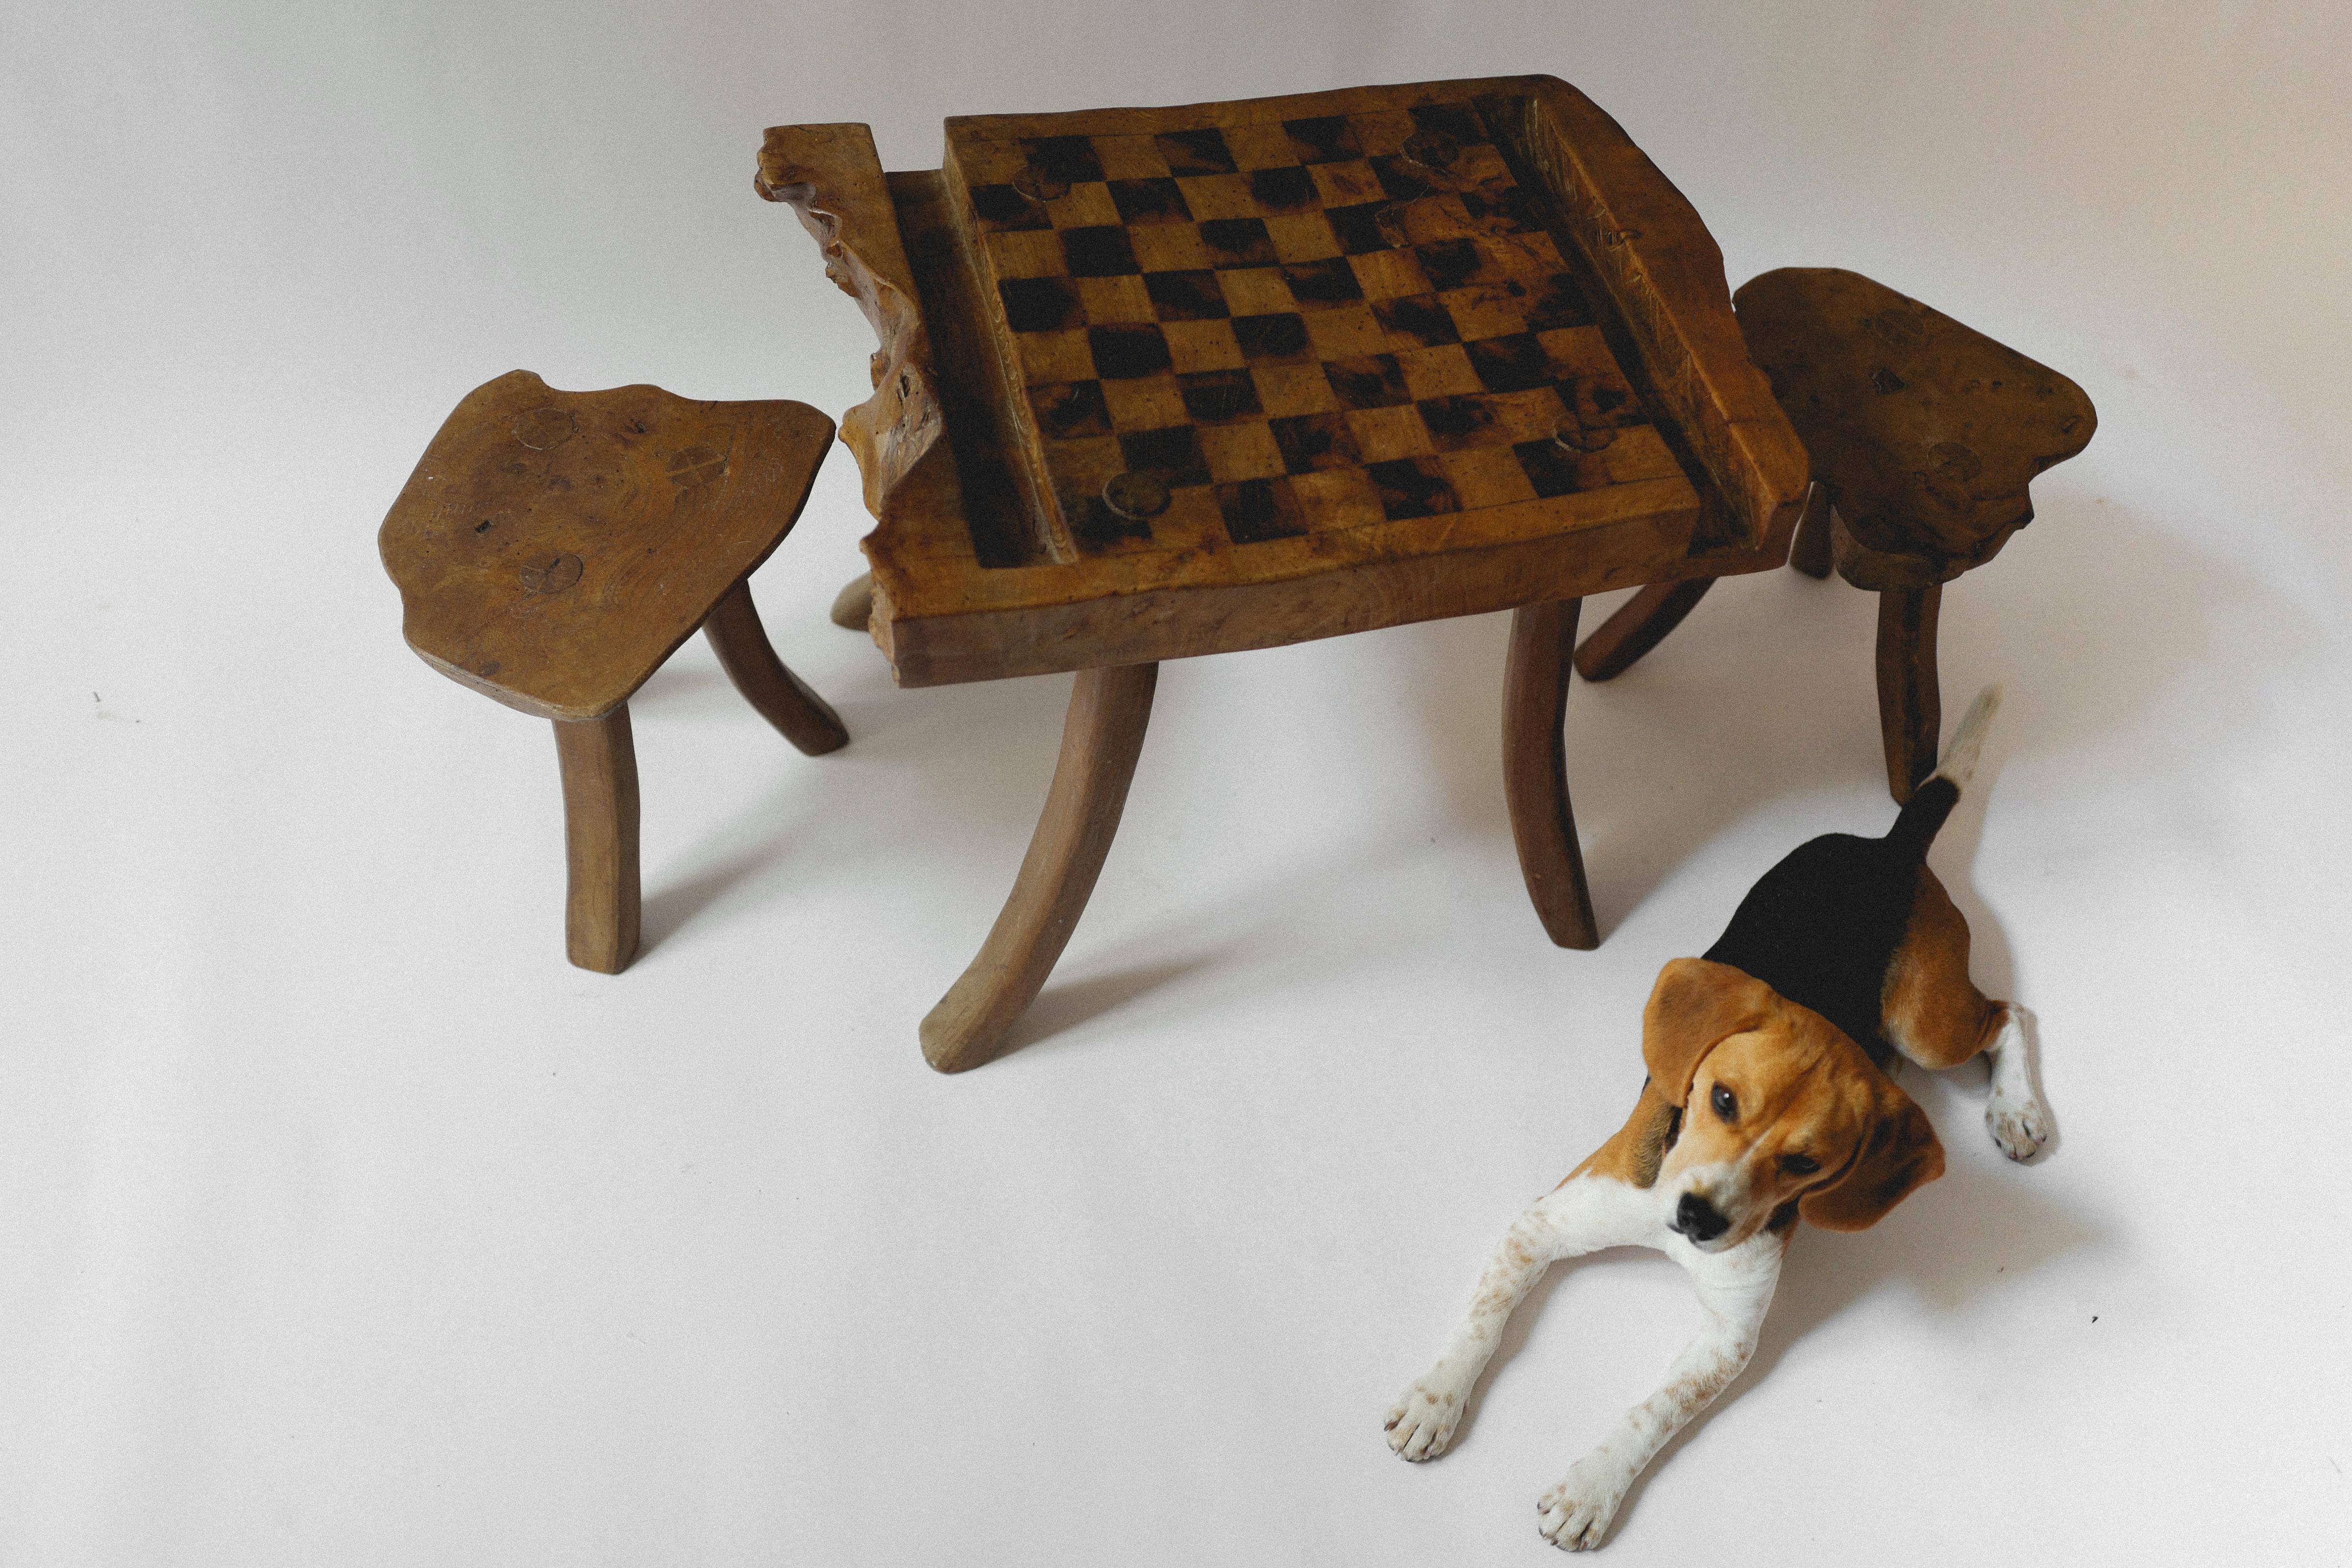 19th century Primitive chess table set with lots of personality. Would work well in a hip hotel or a home game room to immediately add character. 

Stool Size: 12